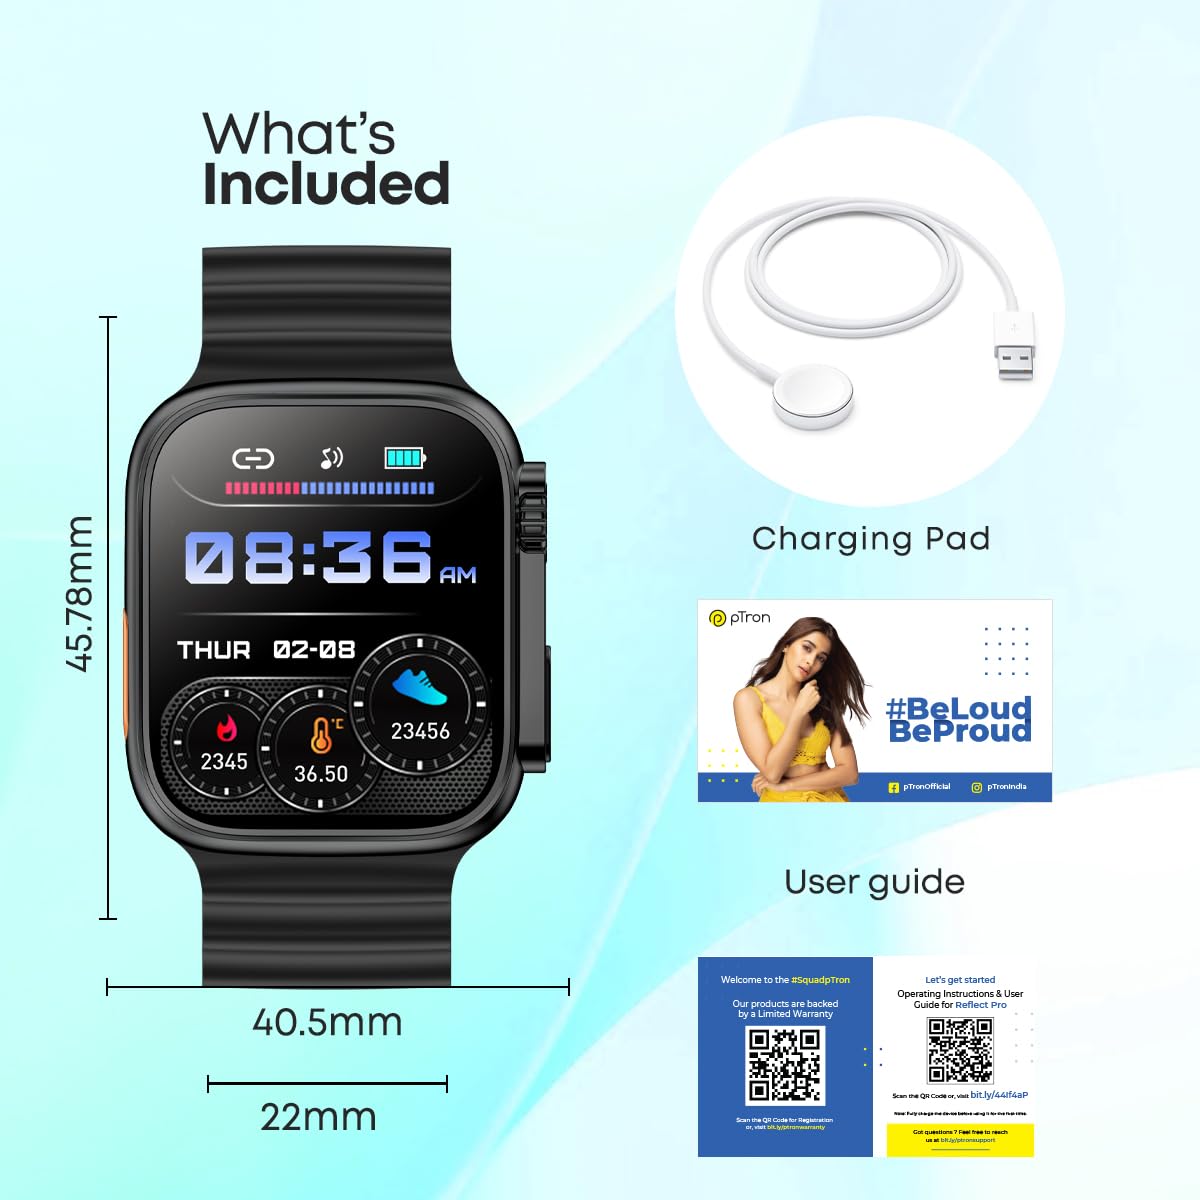 pTron Newly Launched Reflect Pro Smartwatch, Bluetooth Calling, 1.85" Full Touch Display, 600 NITS, Digital Crown, Metal Frame, 100+ Watch Faces, HR, SpO2, Voice Assist, 5 Days Battery Life (Black)